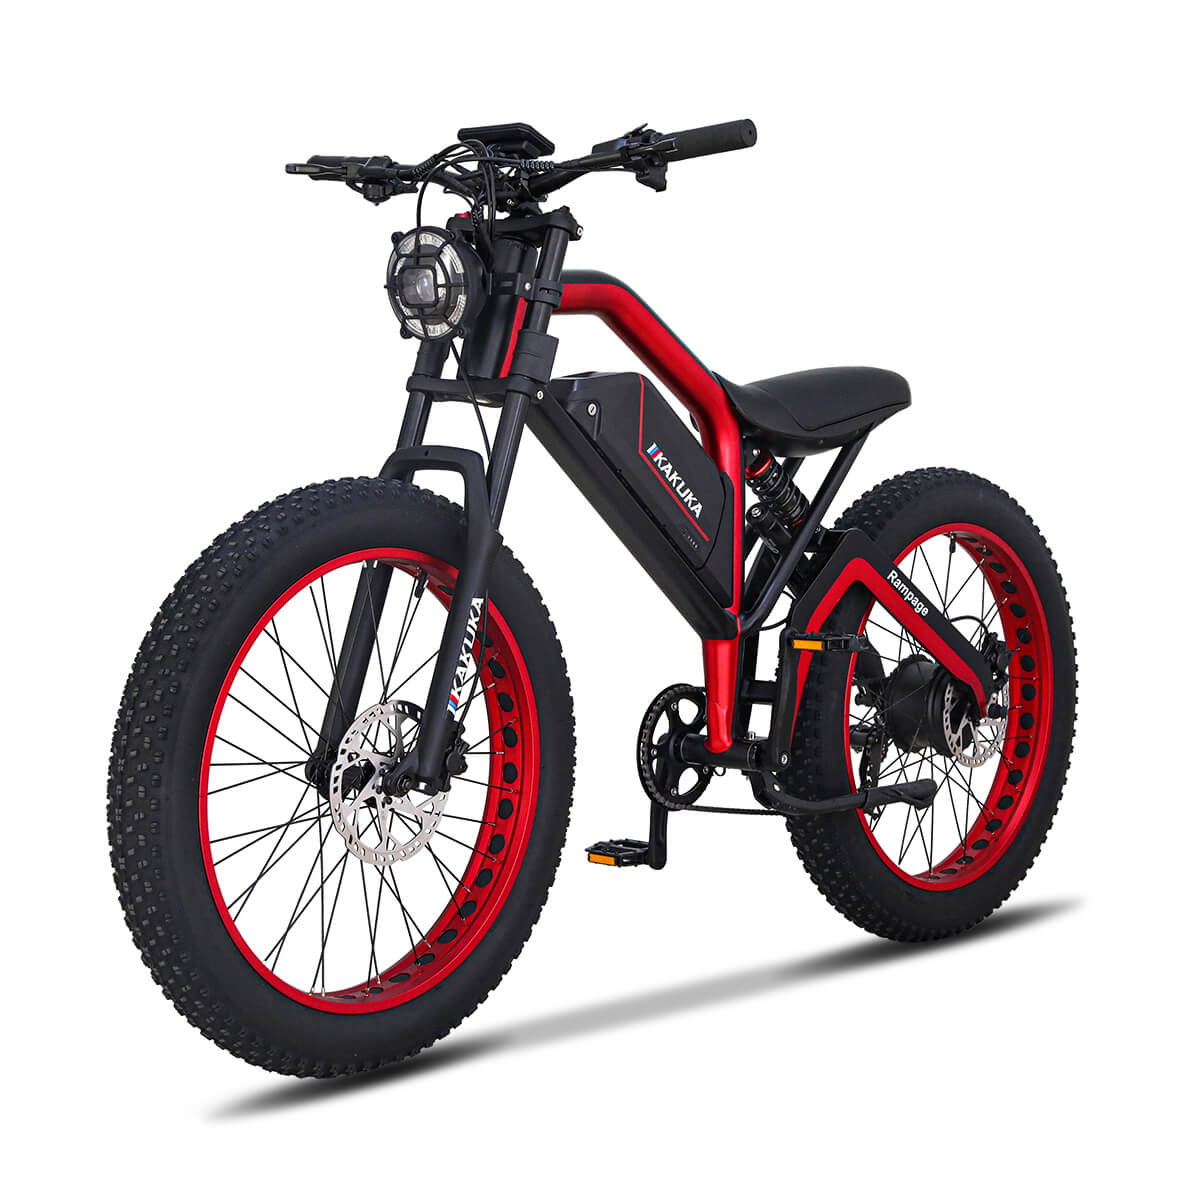 Kakuka Rampage Fat Tire Electric Bike with 26inch fat tires and suit for all terrian.